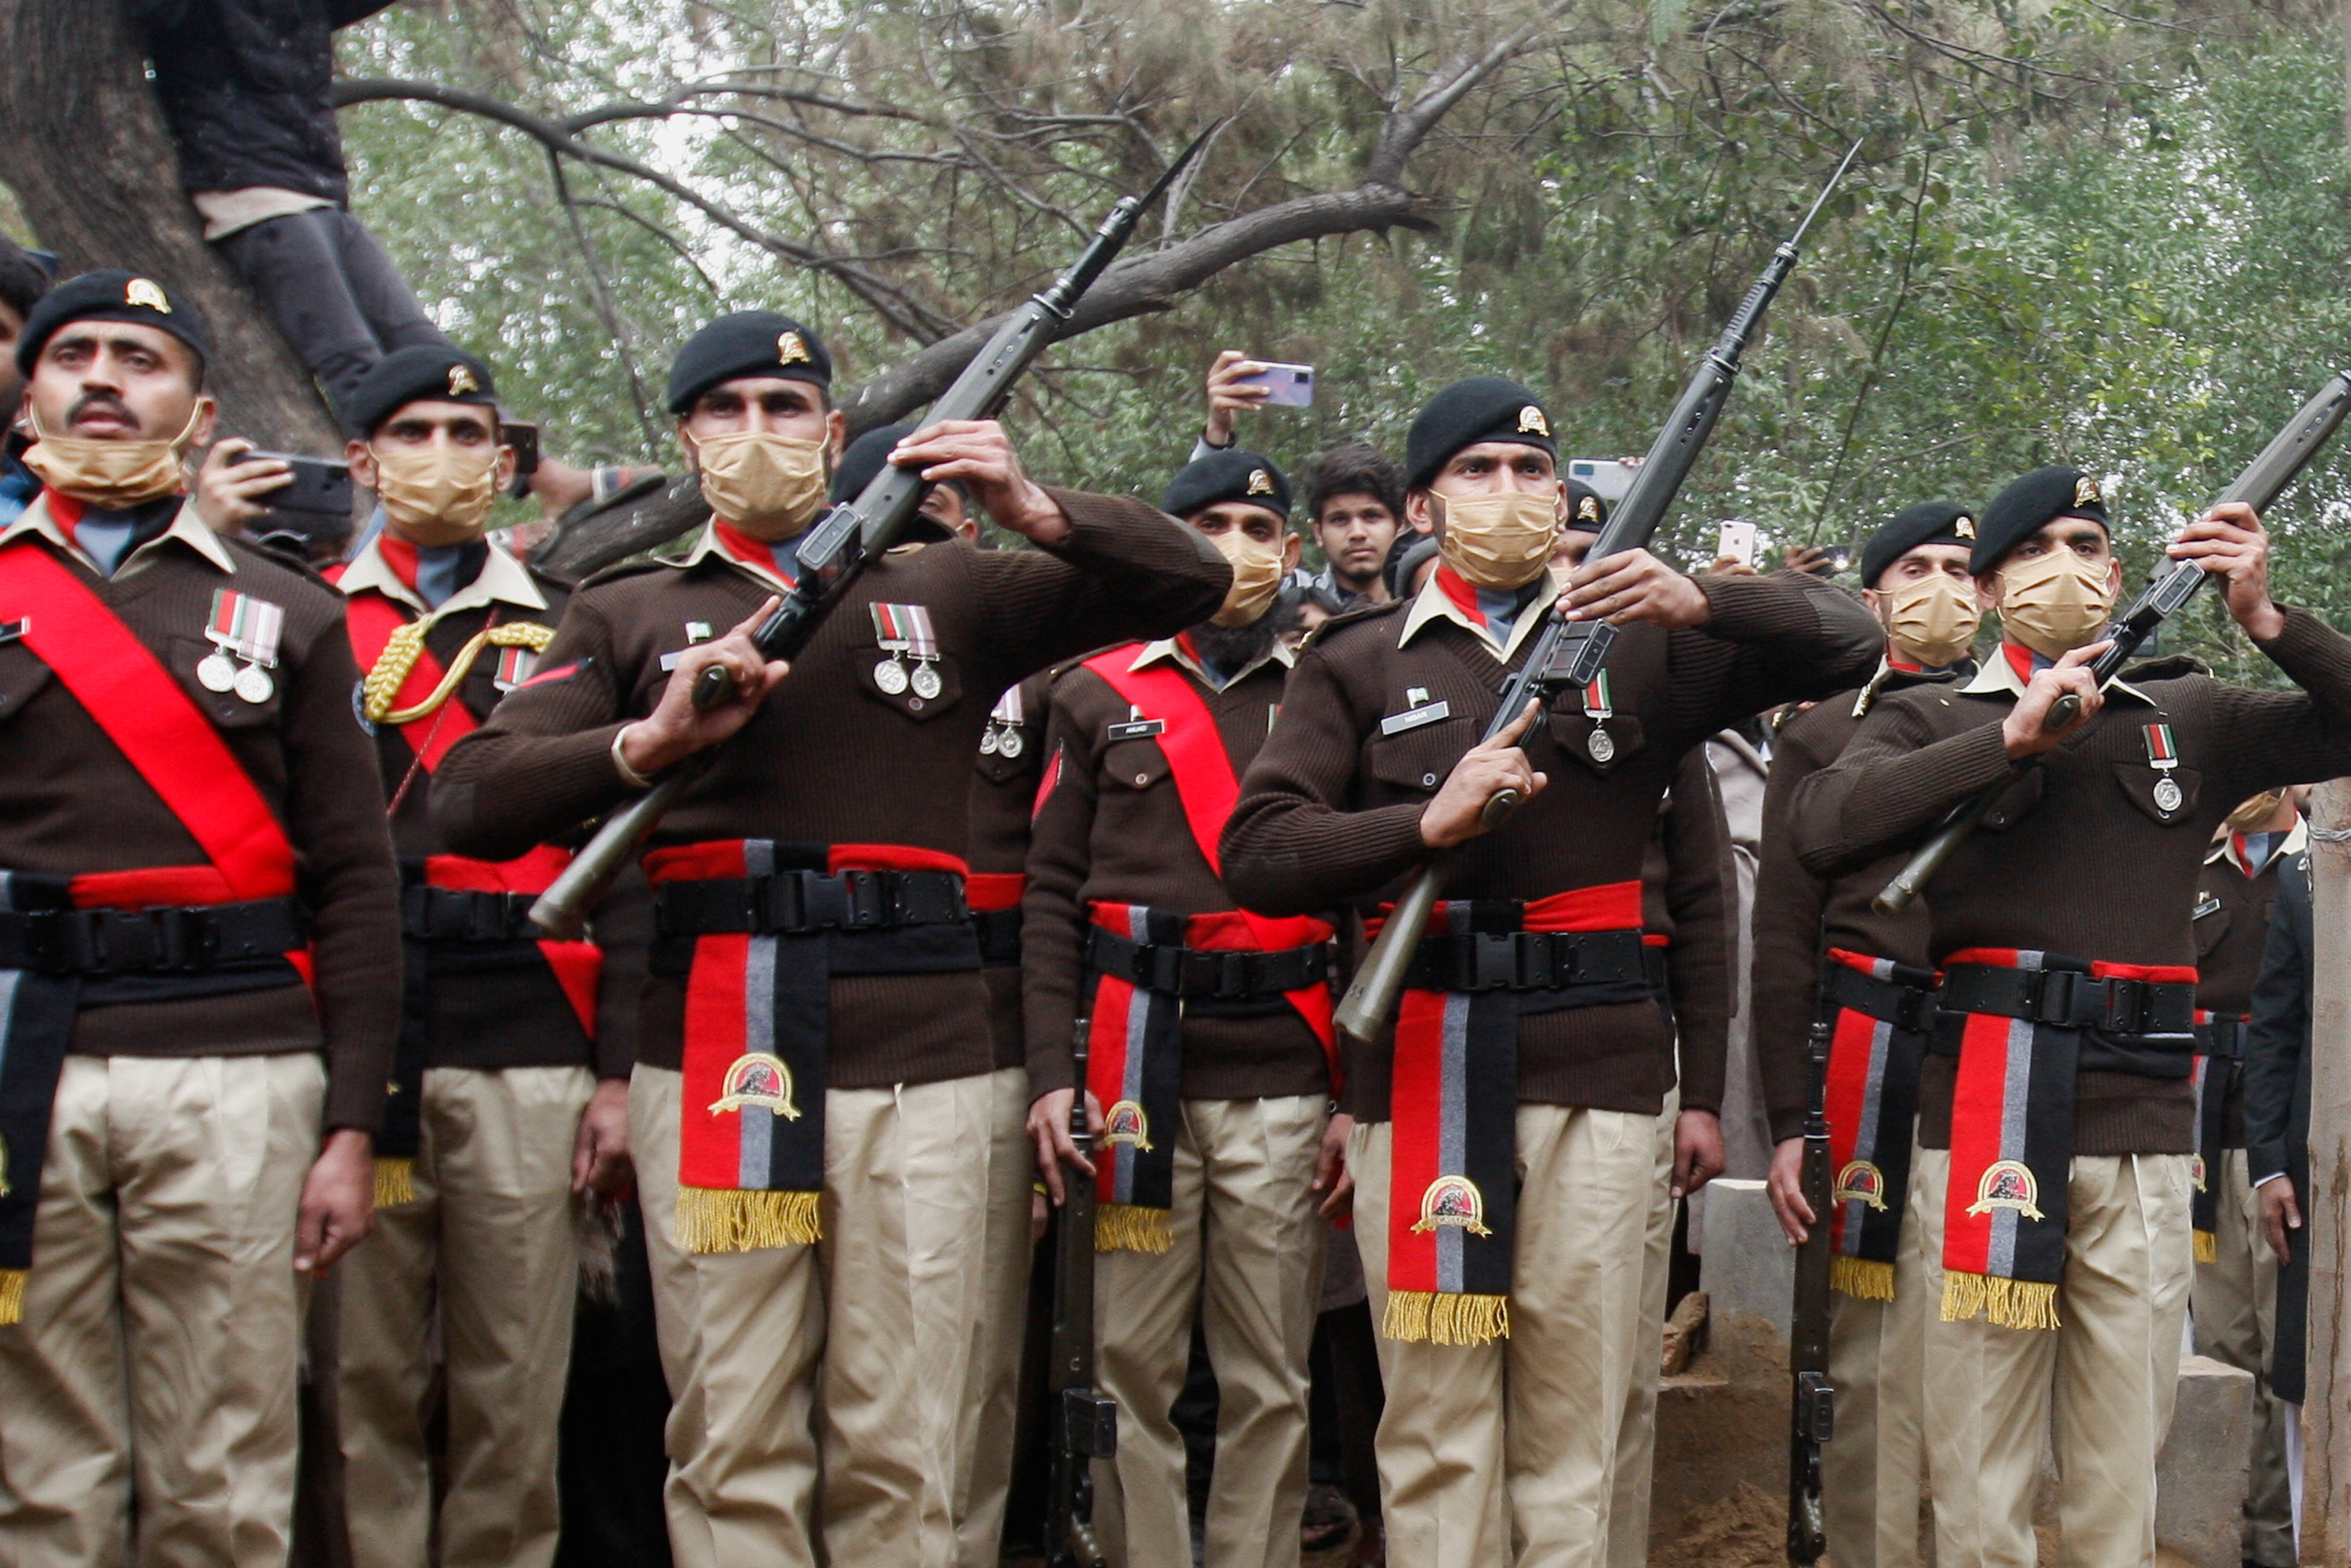 Army soldiers hold their guns to pay tribute to Captain Bilal Khalil, who was killed along with others in an attack on a military base in Nushki, during his funeral in Faisalabad, Pakistan, February 4, 2022. REUTERS/Fayyaz Hussain